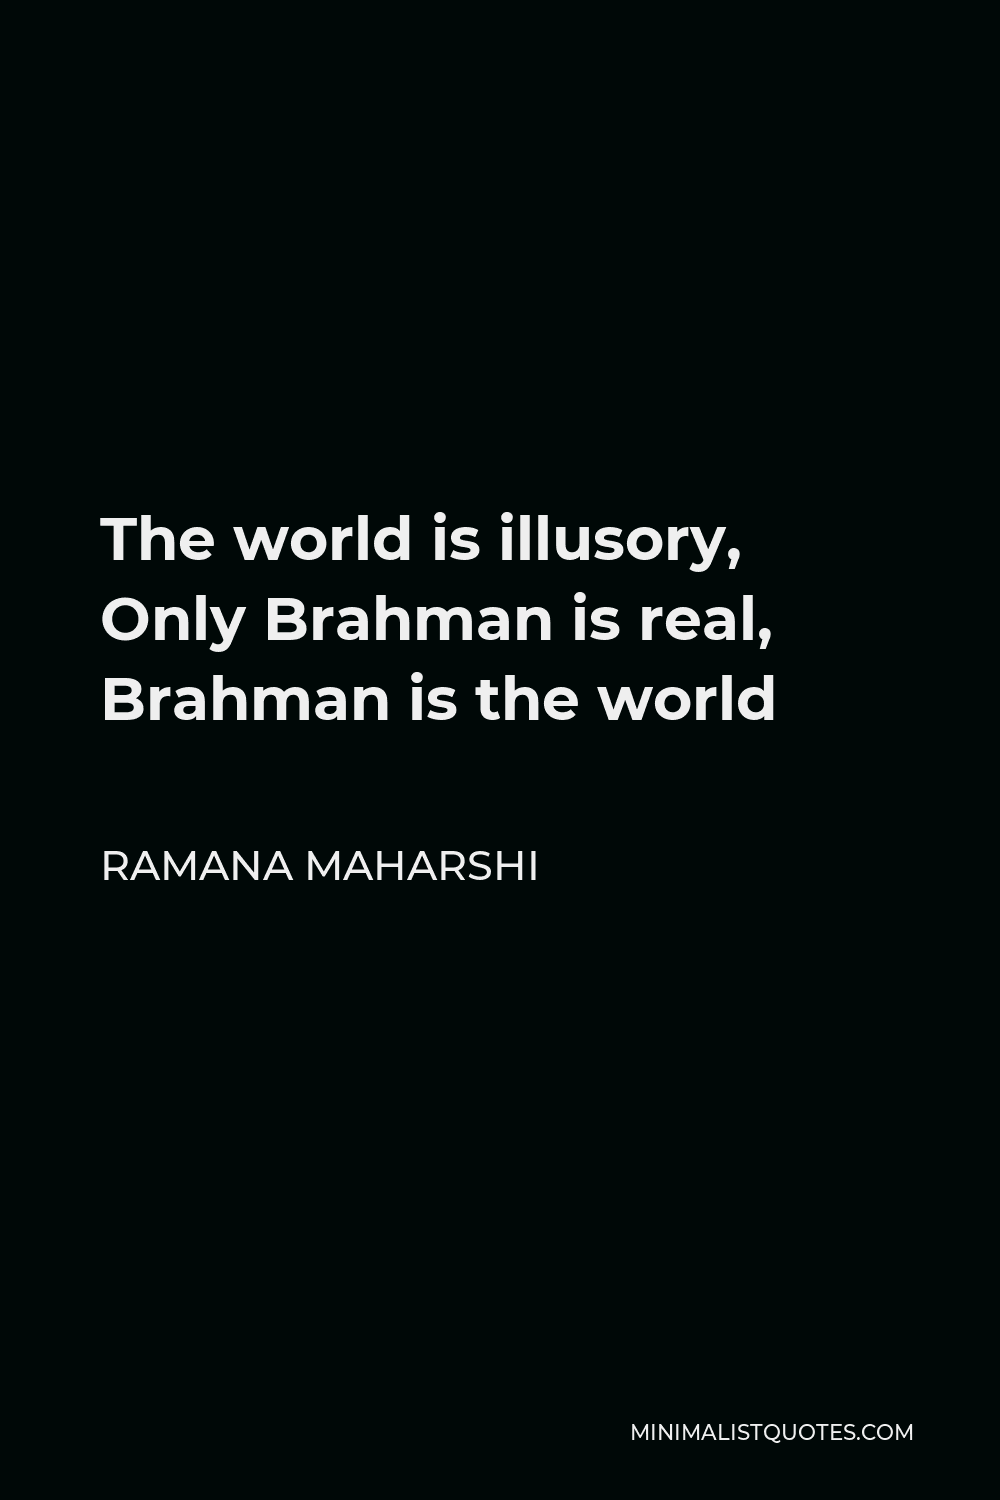 Ramana Maharshi Quote - The world is illusory, Only Brahman is real, Brahman is the world